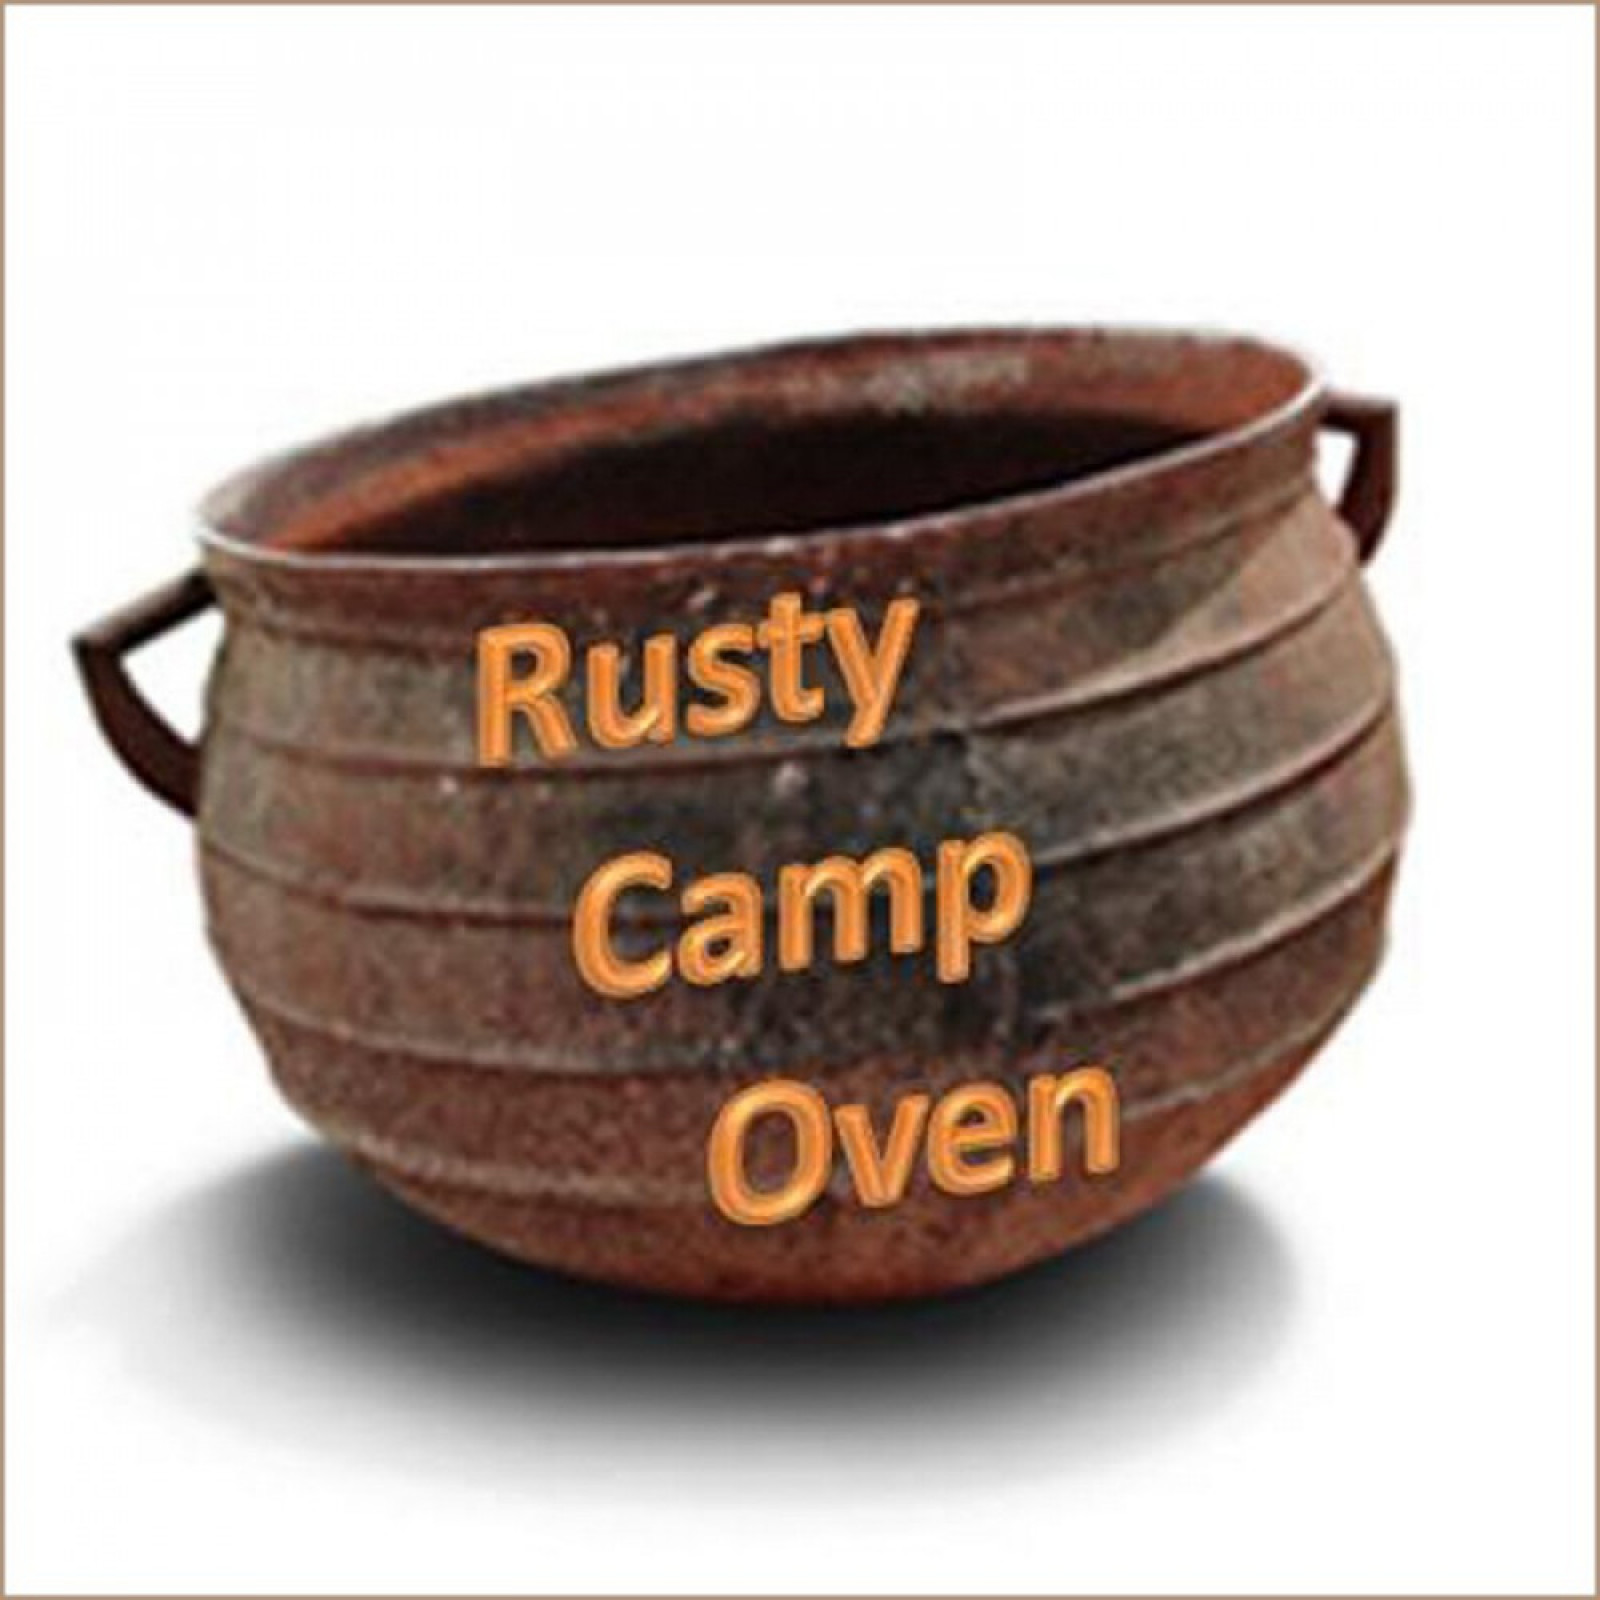 Rusty Camp Oven and Gallery